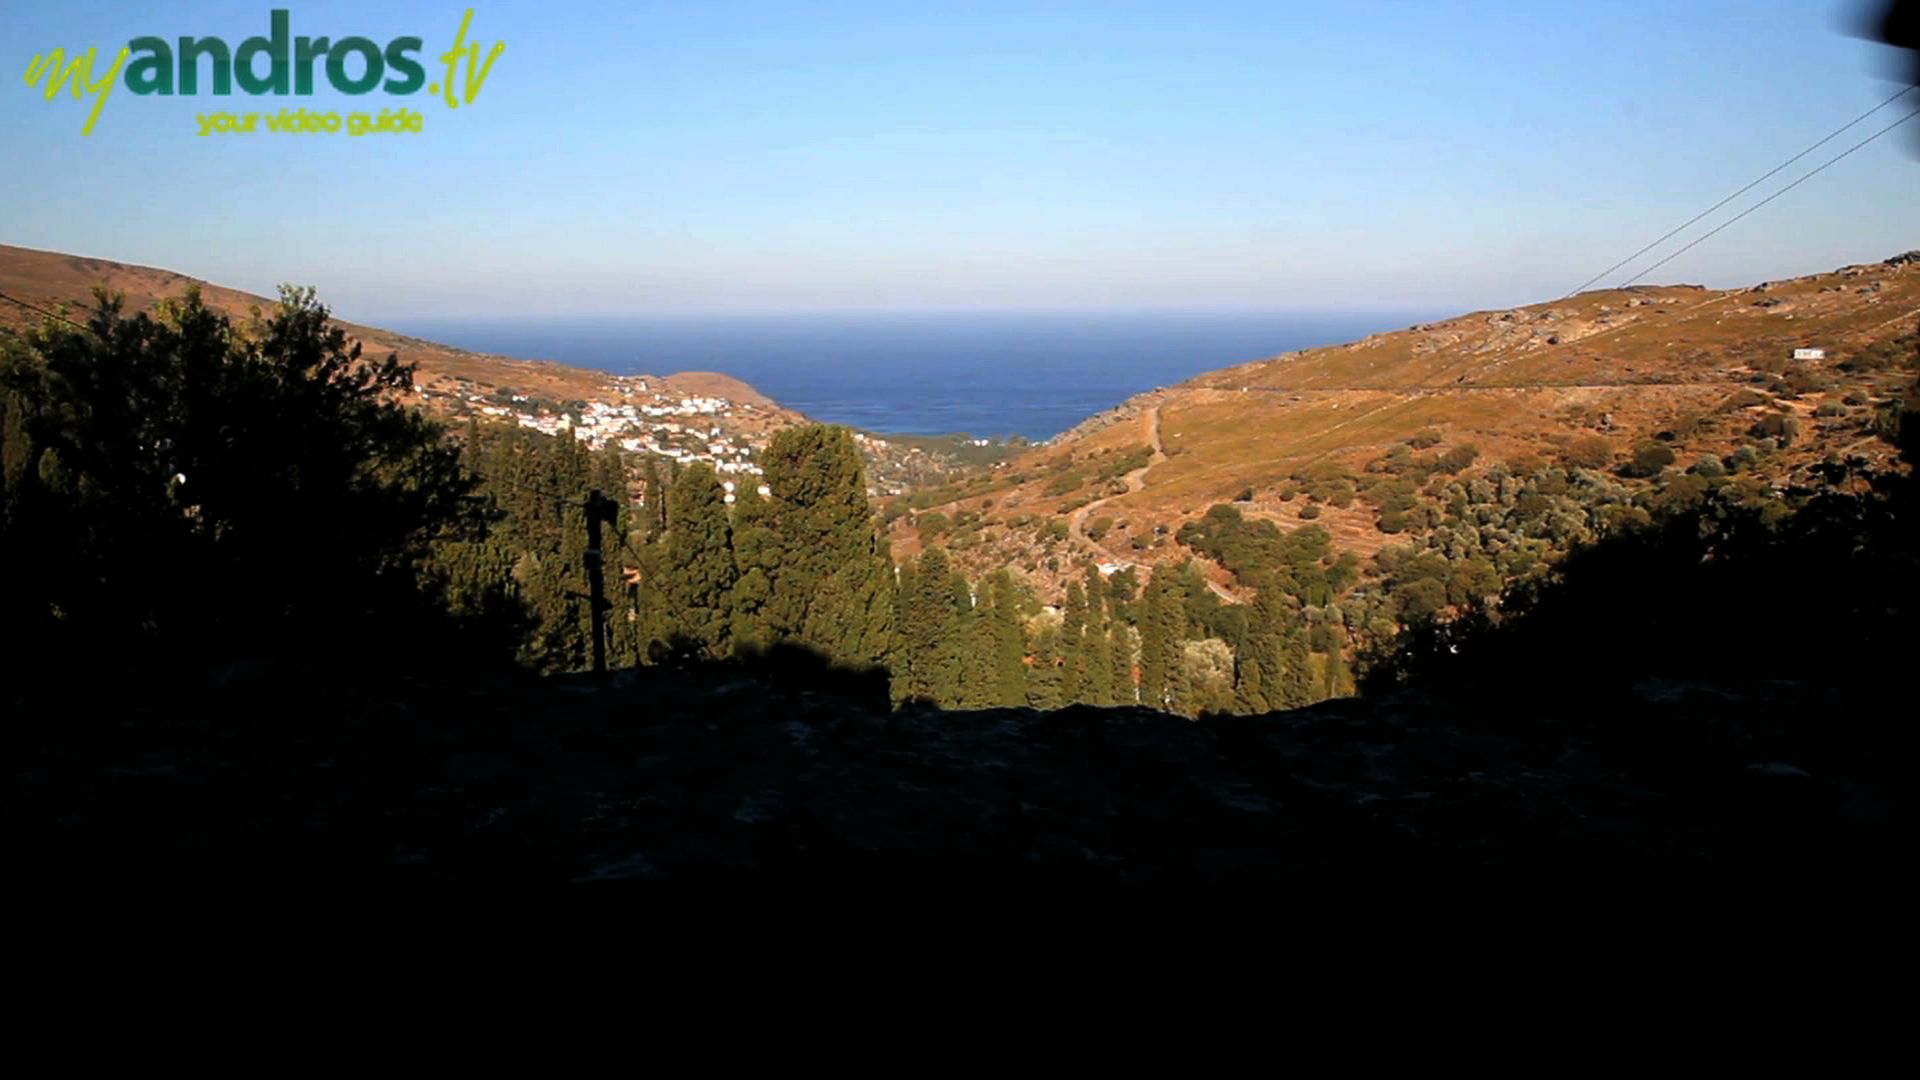 Hiking in Andros